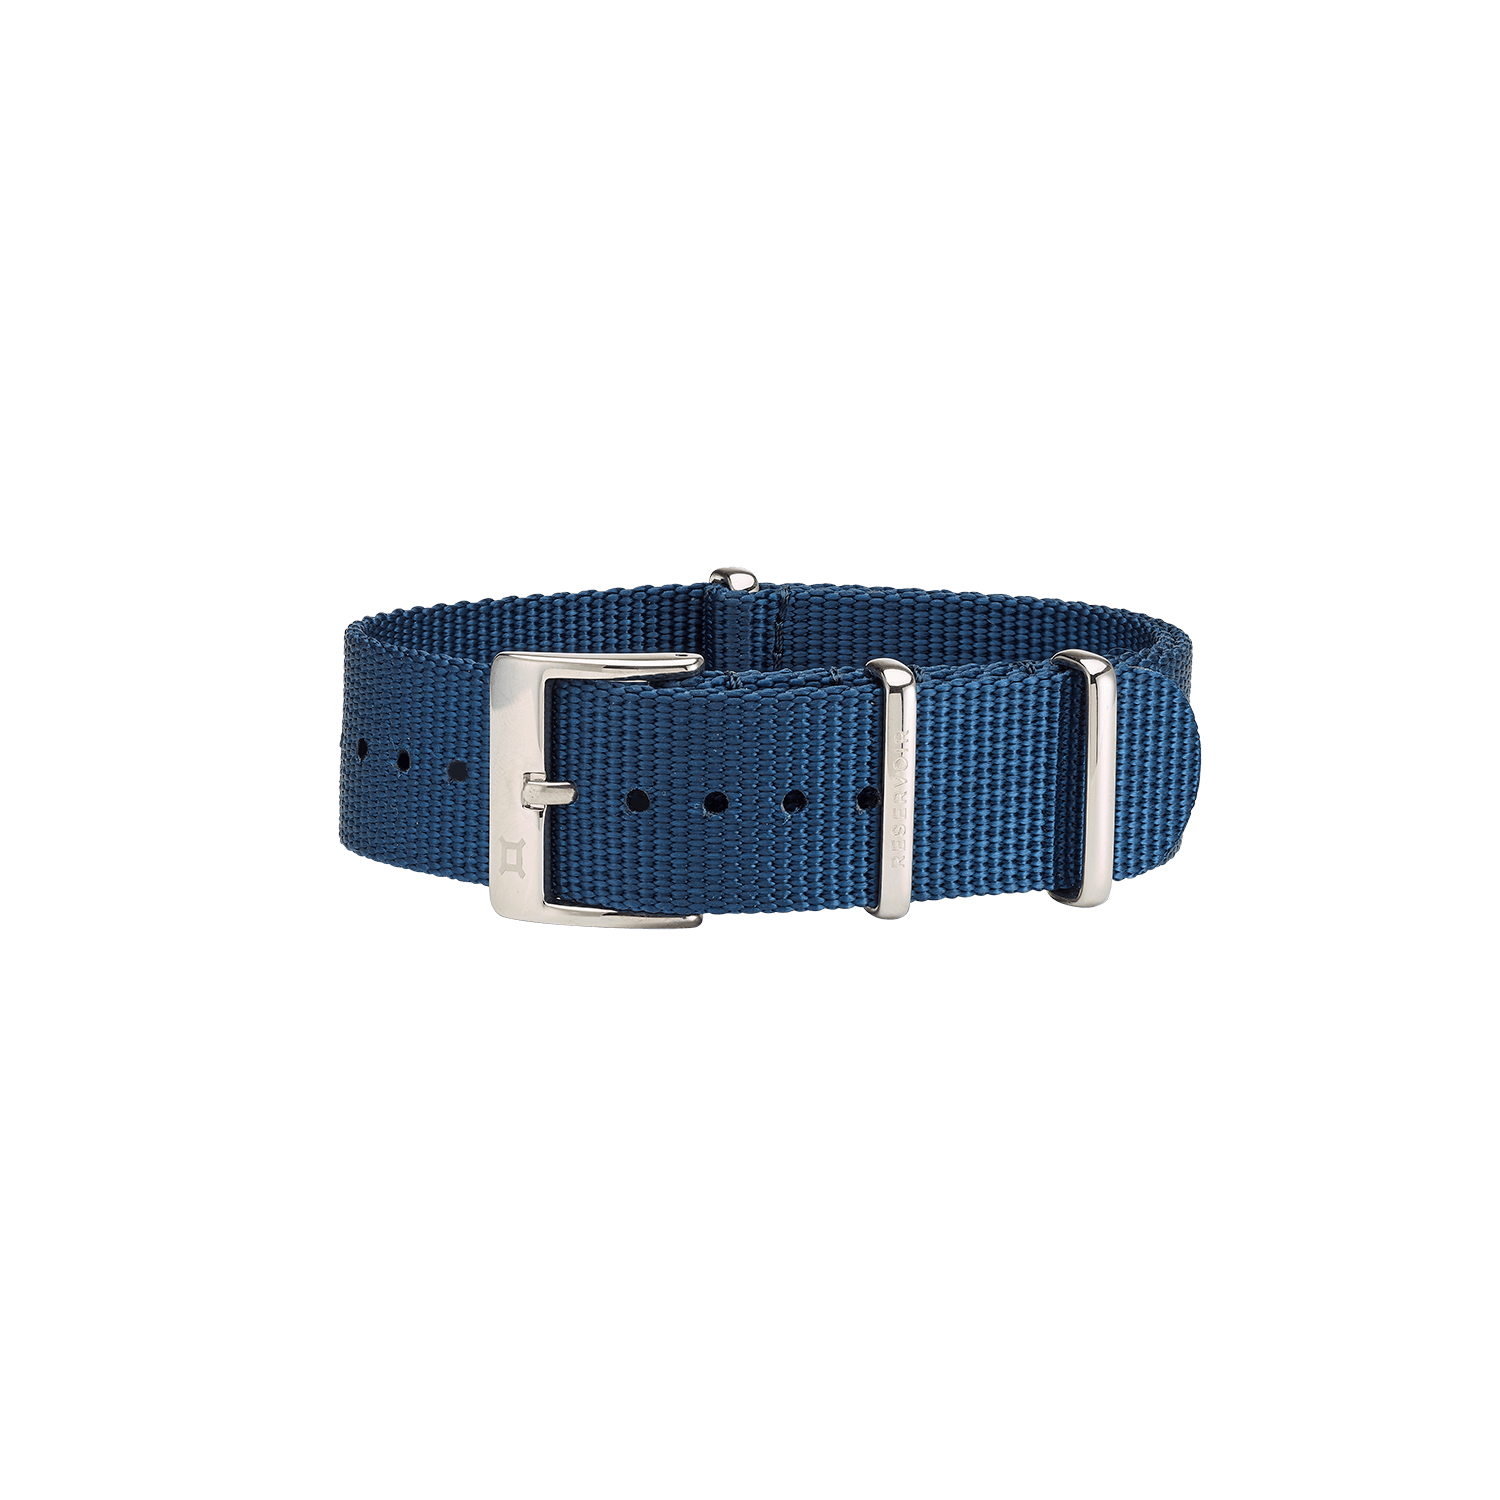 Dark Navy Blue Nato Strap Watch with Light Grey and Light Blue-Purple Accents.